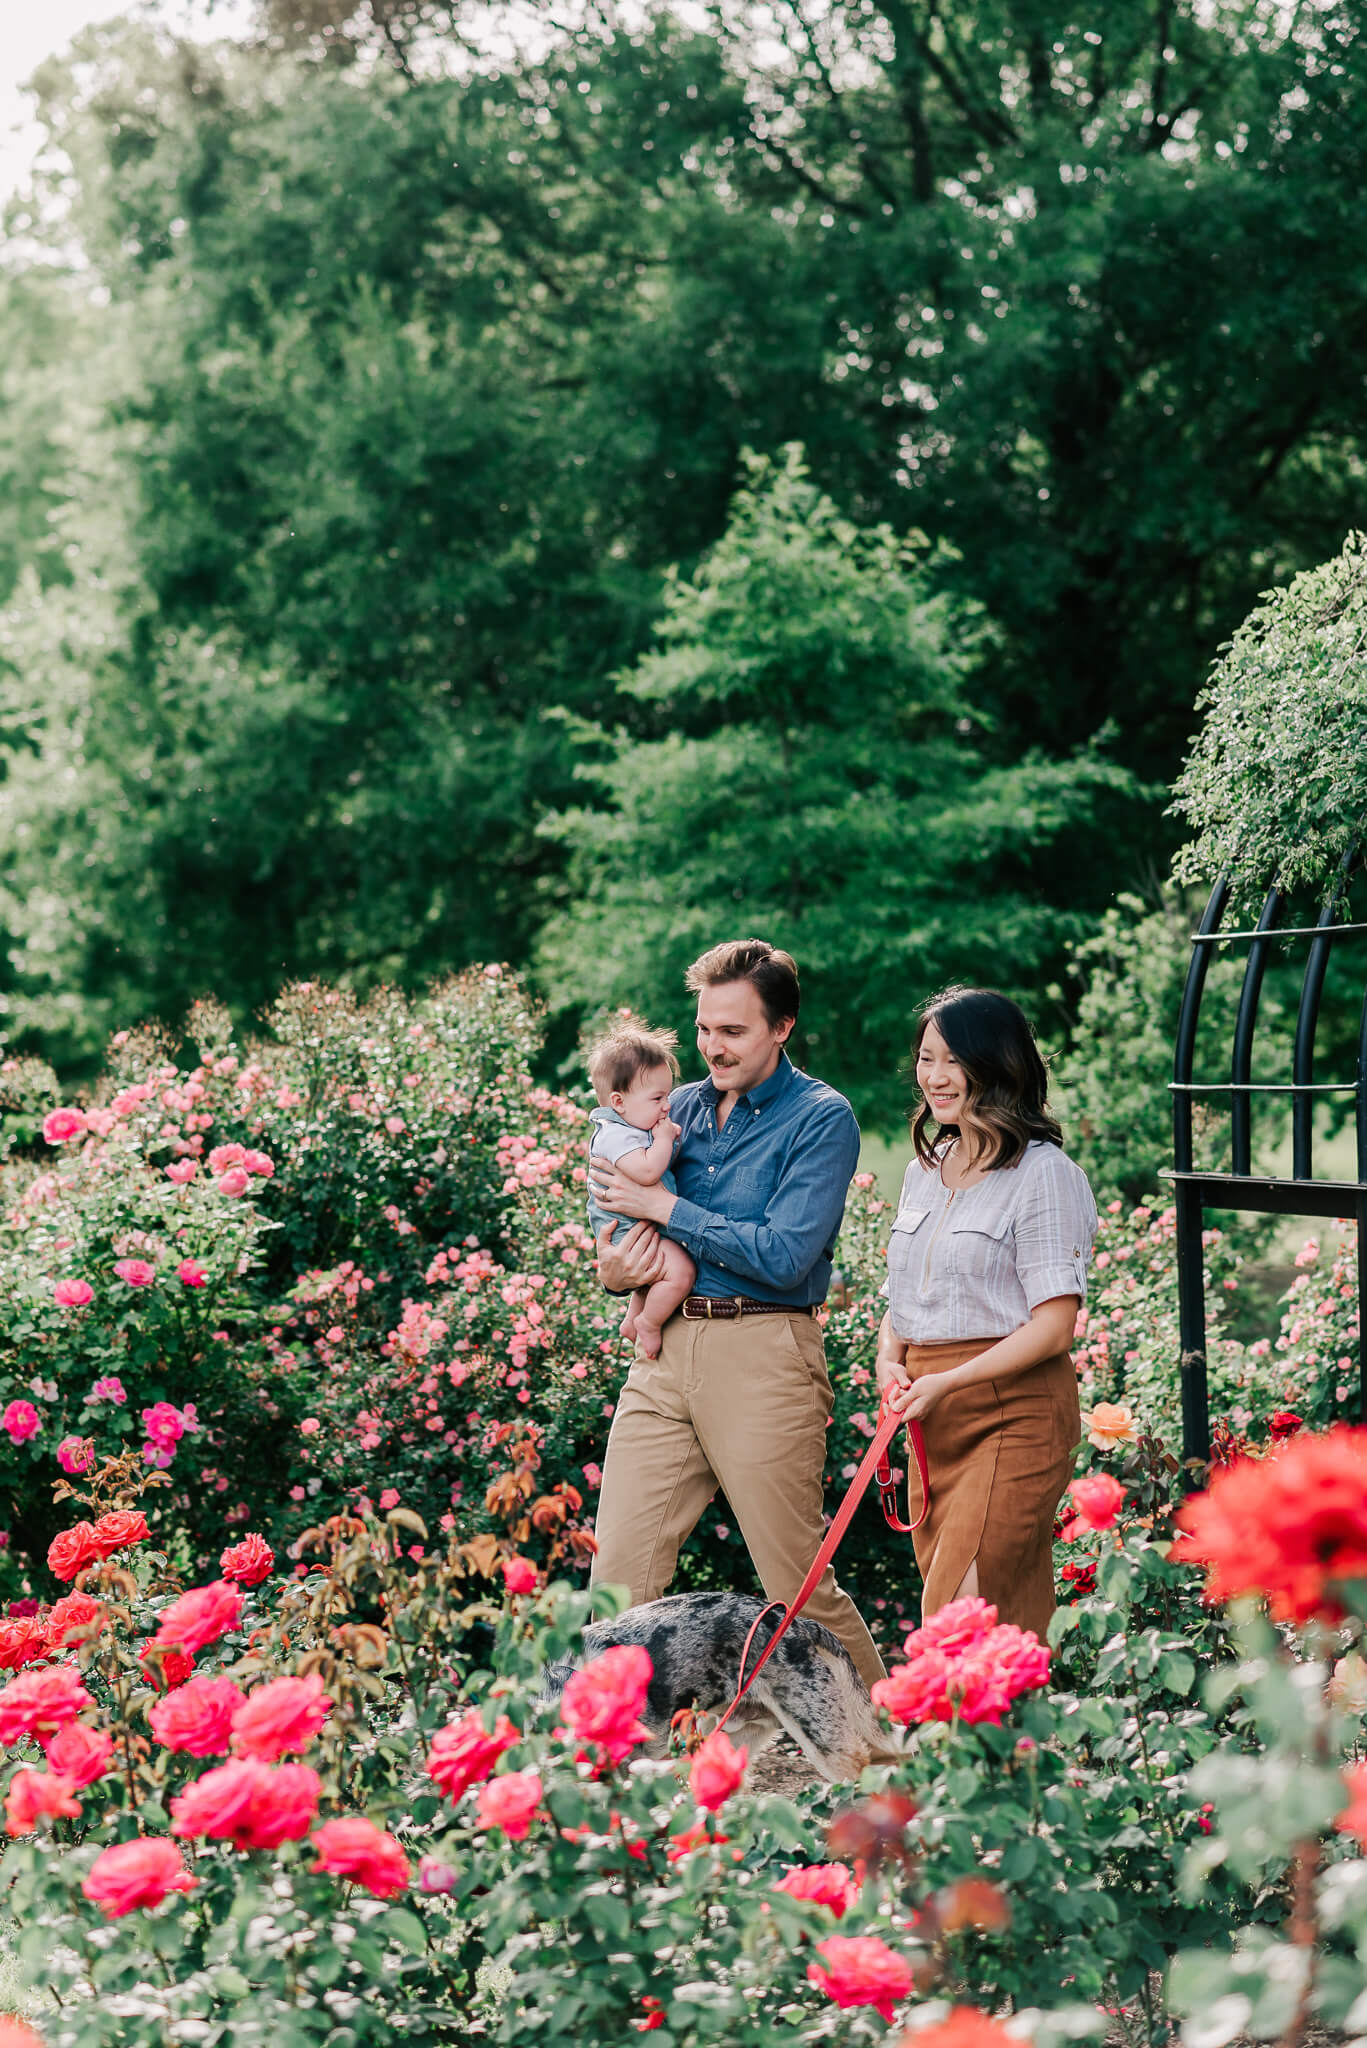 A father in a blue shirt and khakis walks through a rose garden holding his infant son with his wife walking their blue coat dog centreville obgyn